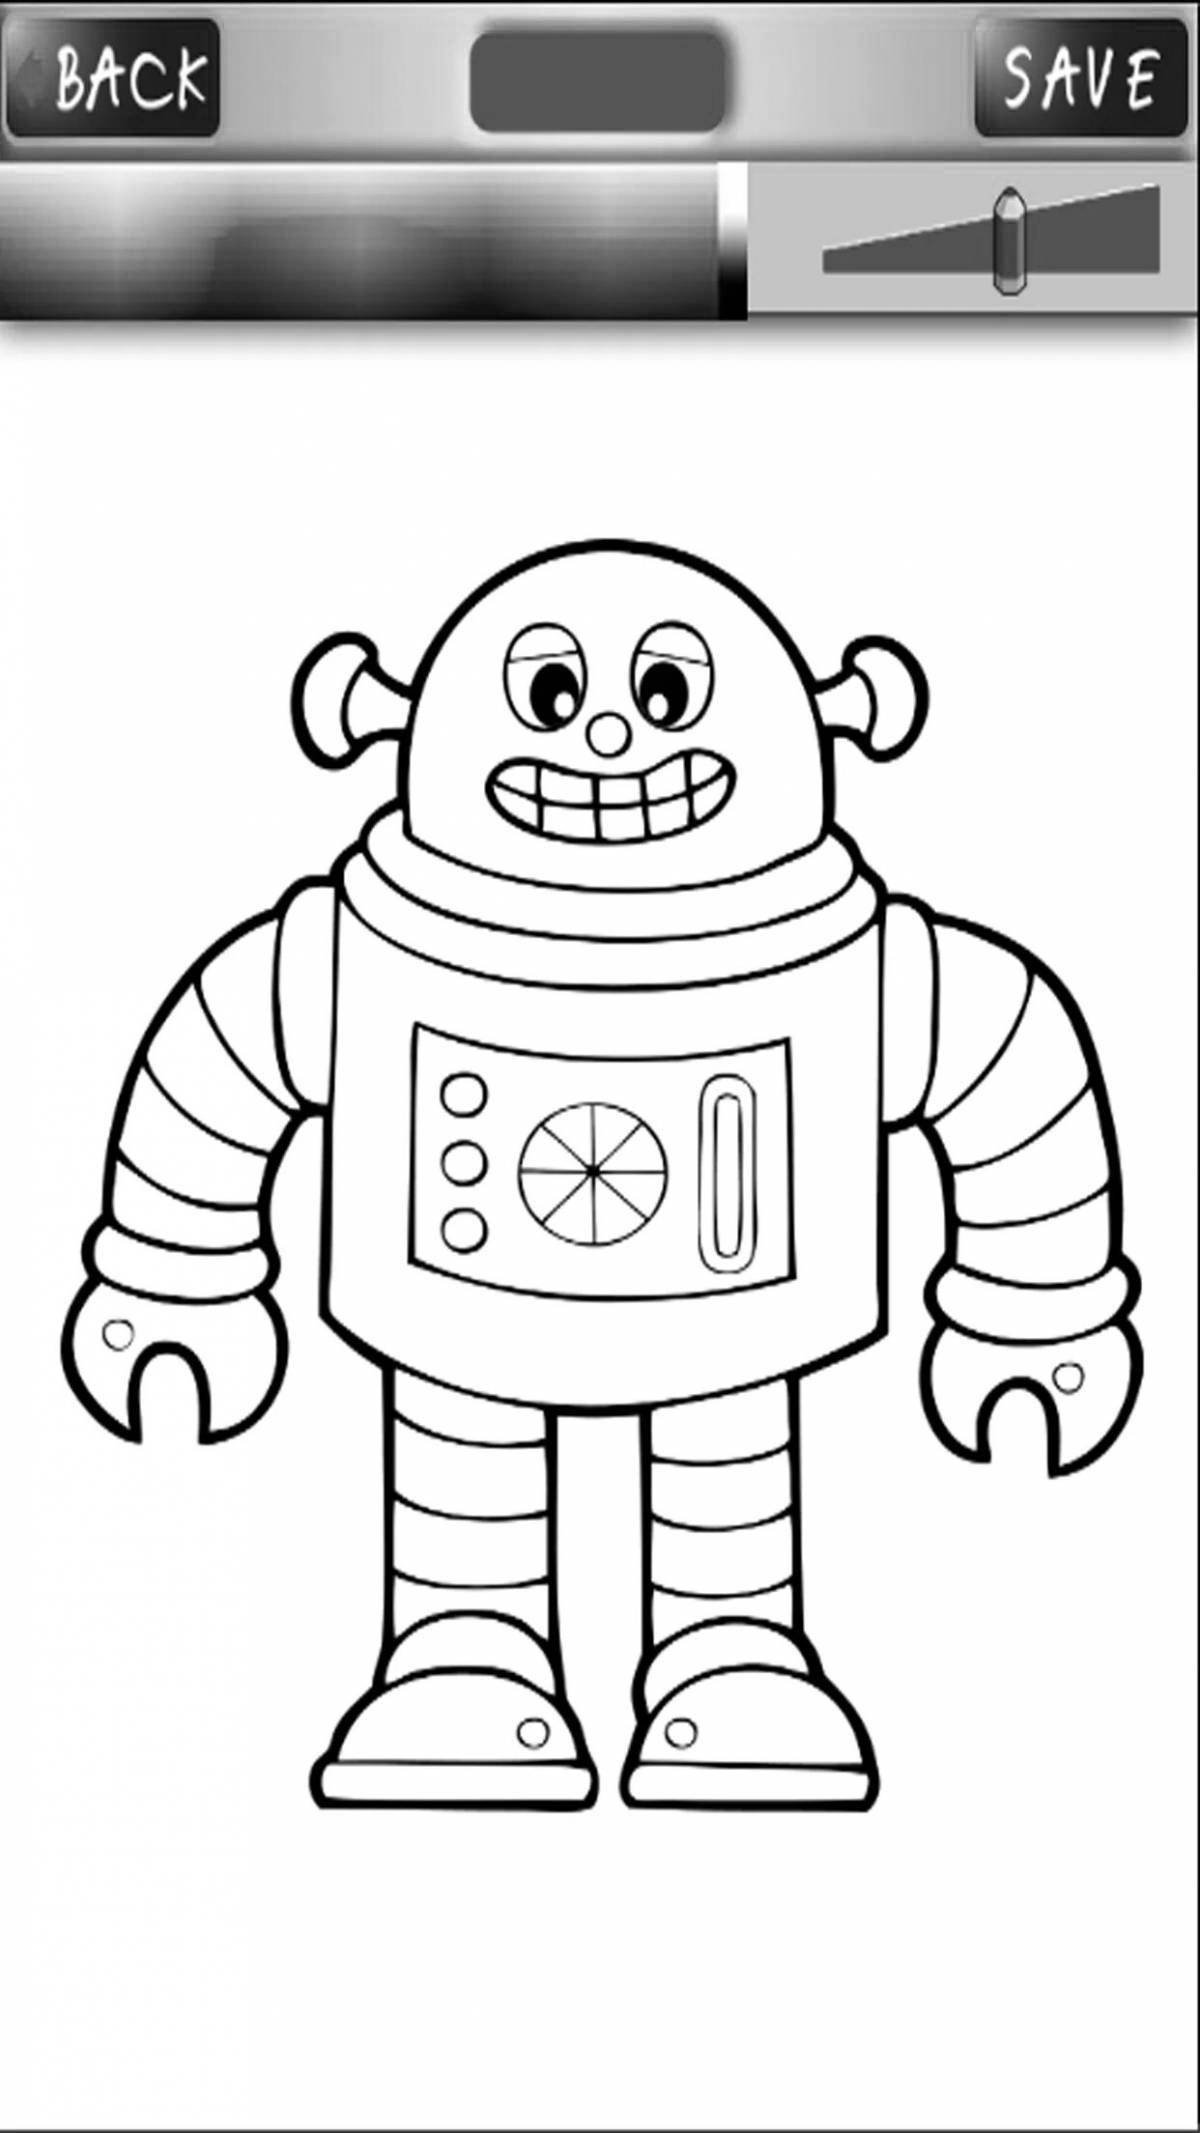 Coloring page attractive robot teacher